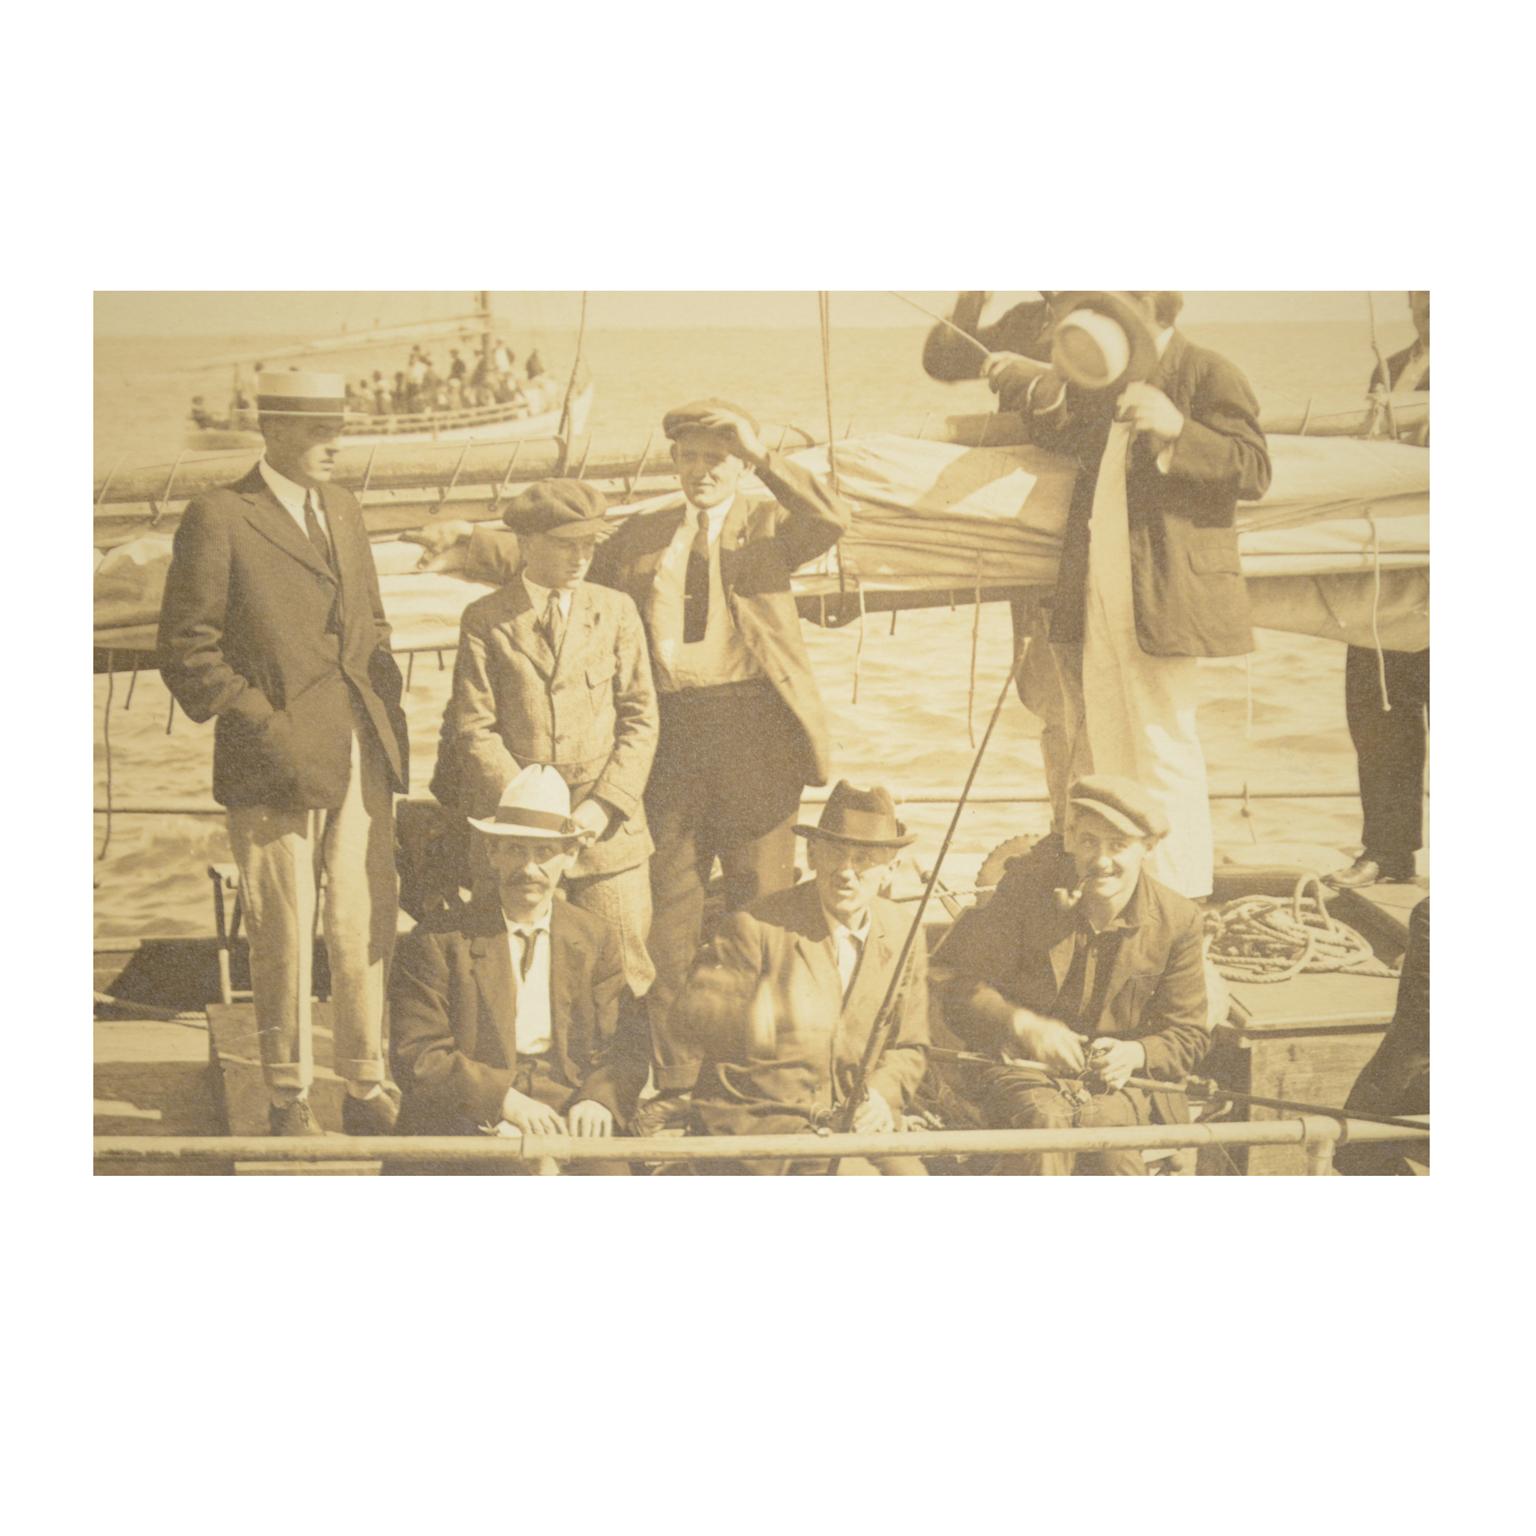 Historical photography of the Fitzgerald sailboat with 17 people on board, circa 1930. Very good condition. Cm 24 x 19.5.
Shipping is insured by Lloyd's London.
 